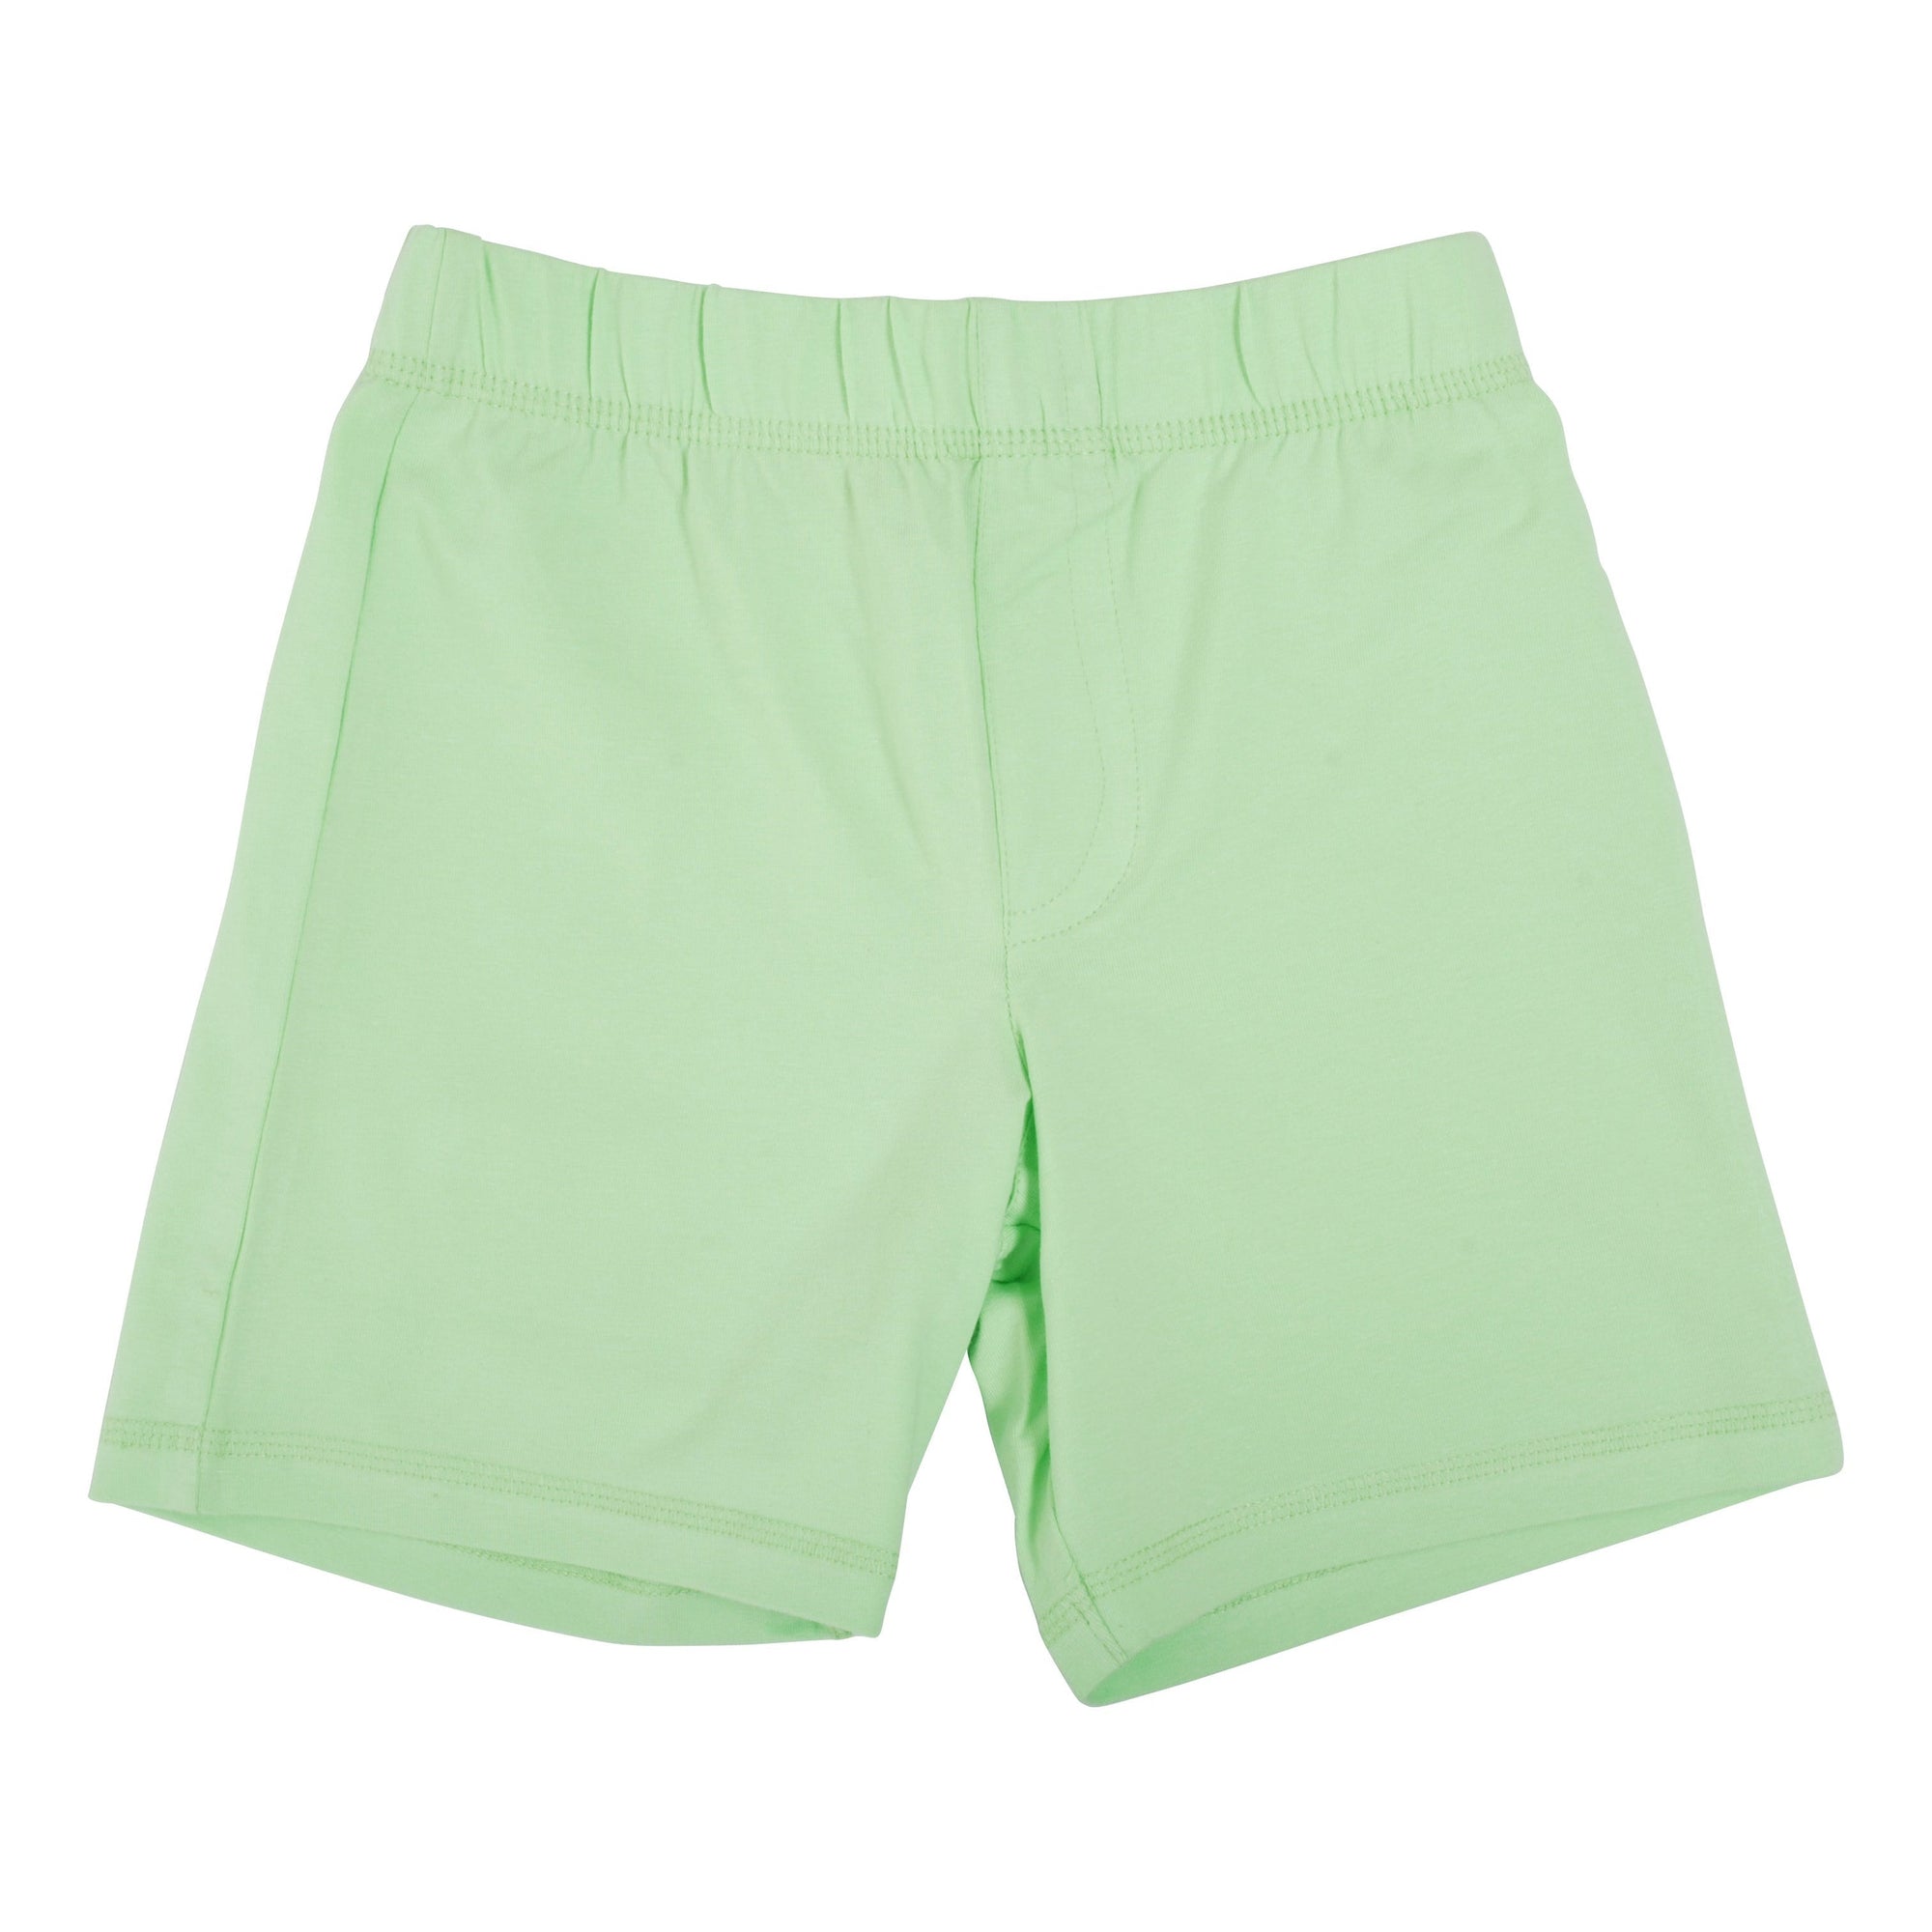 Paradise Green Shorts - 1 Left Size 12-14 years-More Than A Fling-Modern Rascals